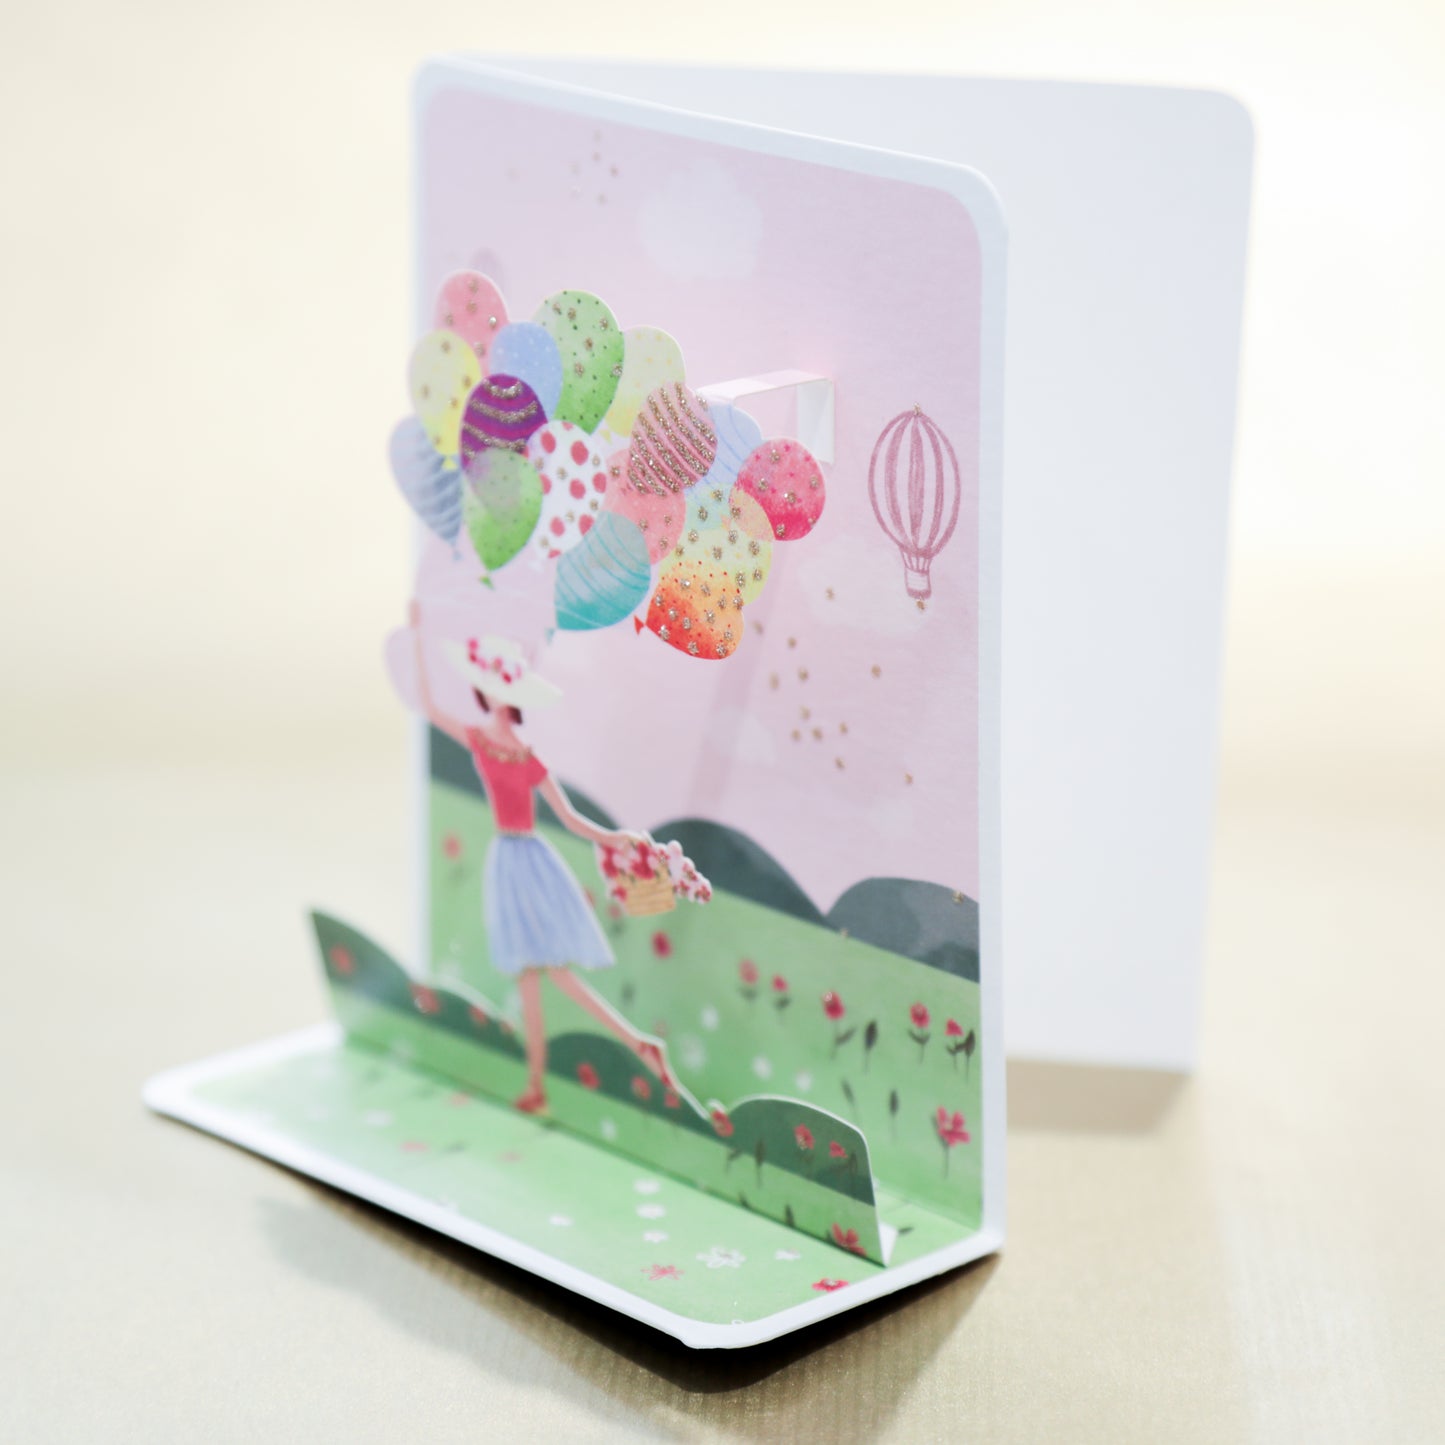 3D Greeting Card - Balloon cluster in a flower field